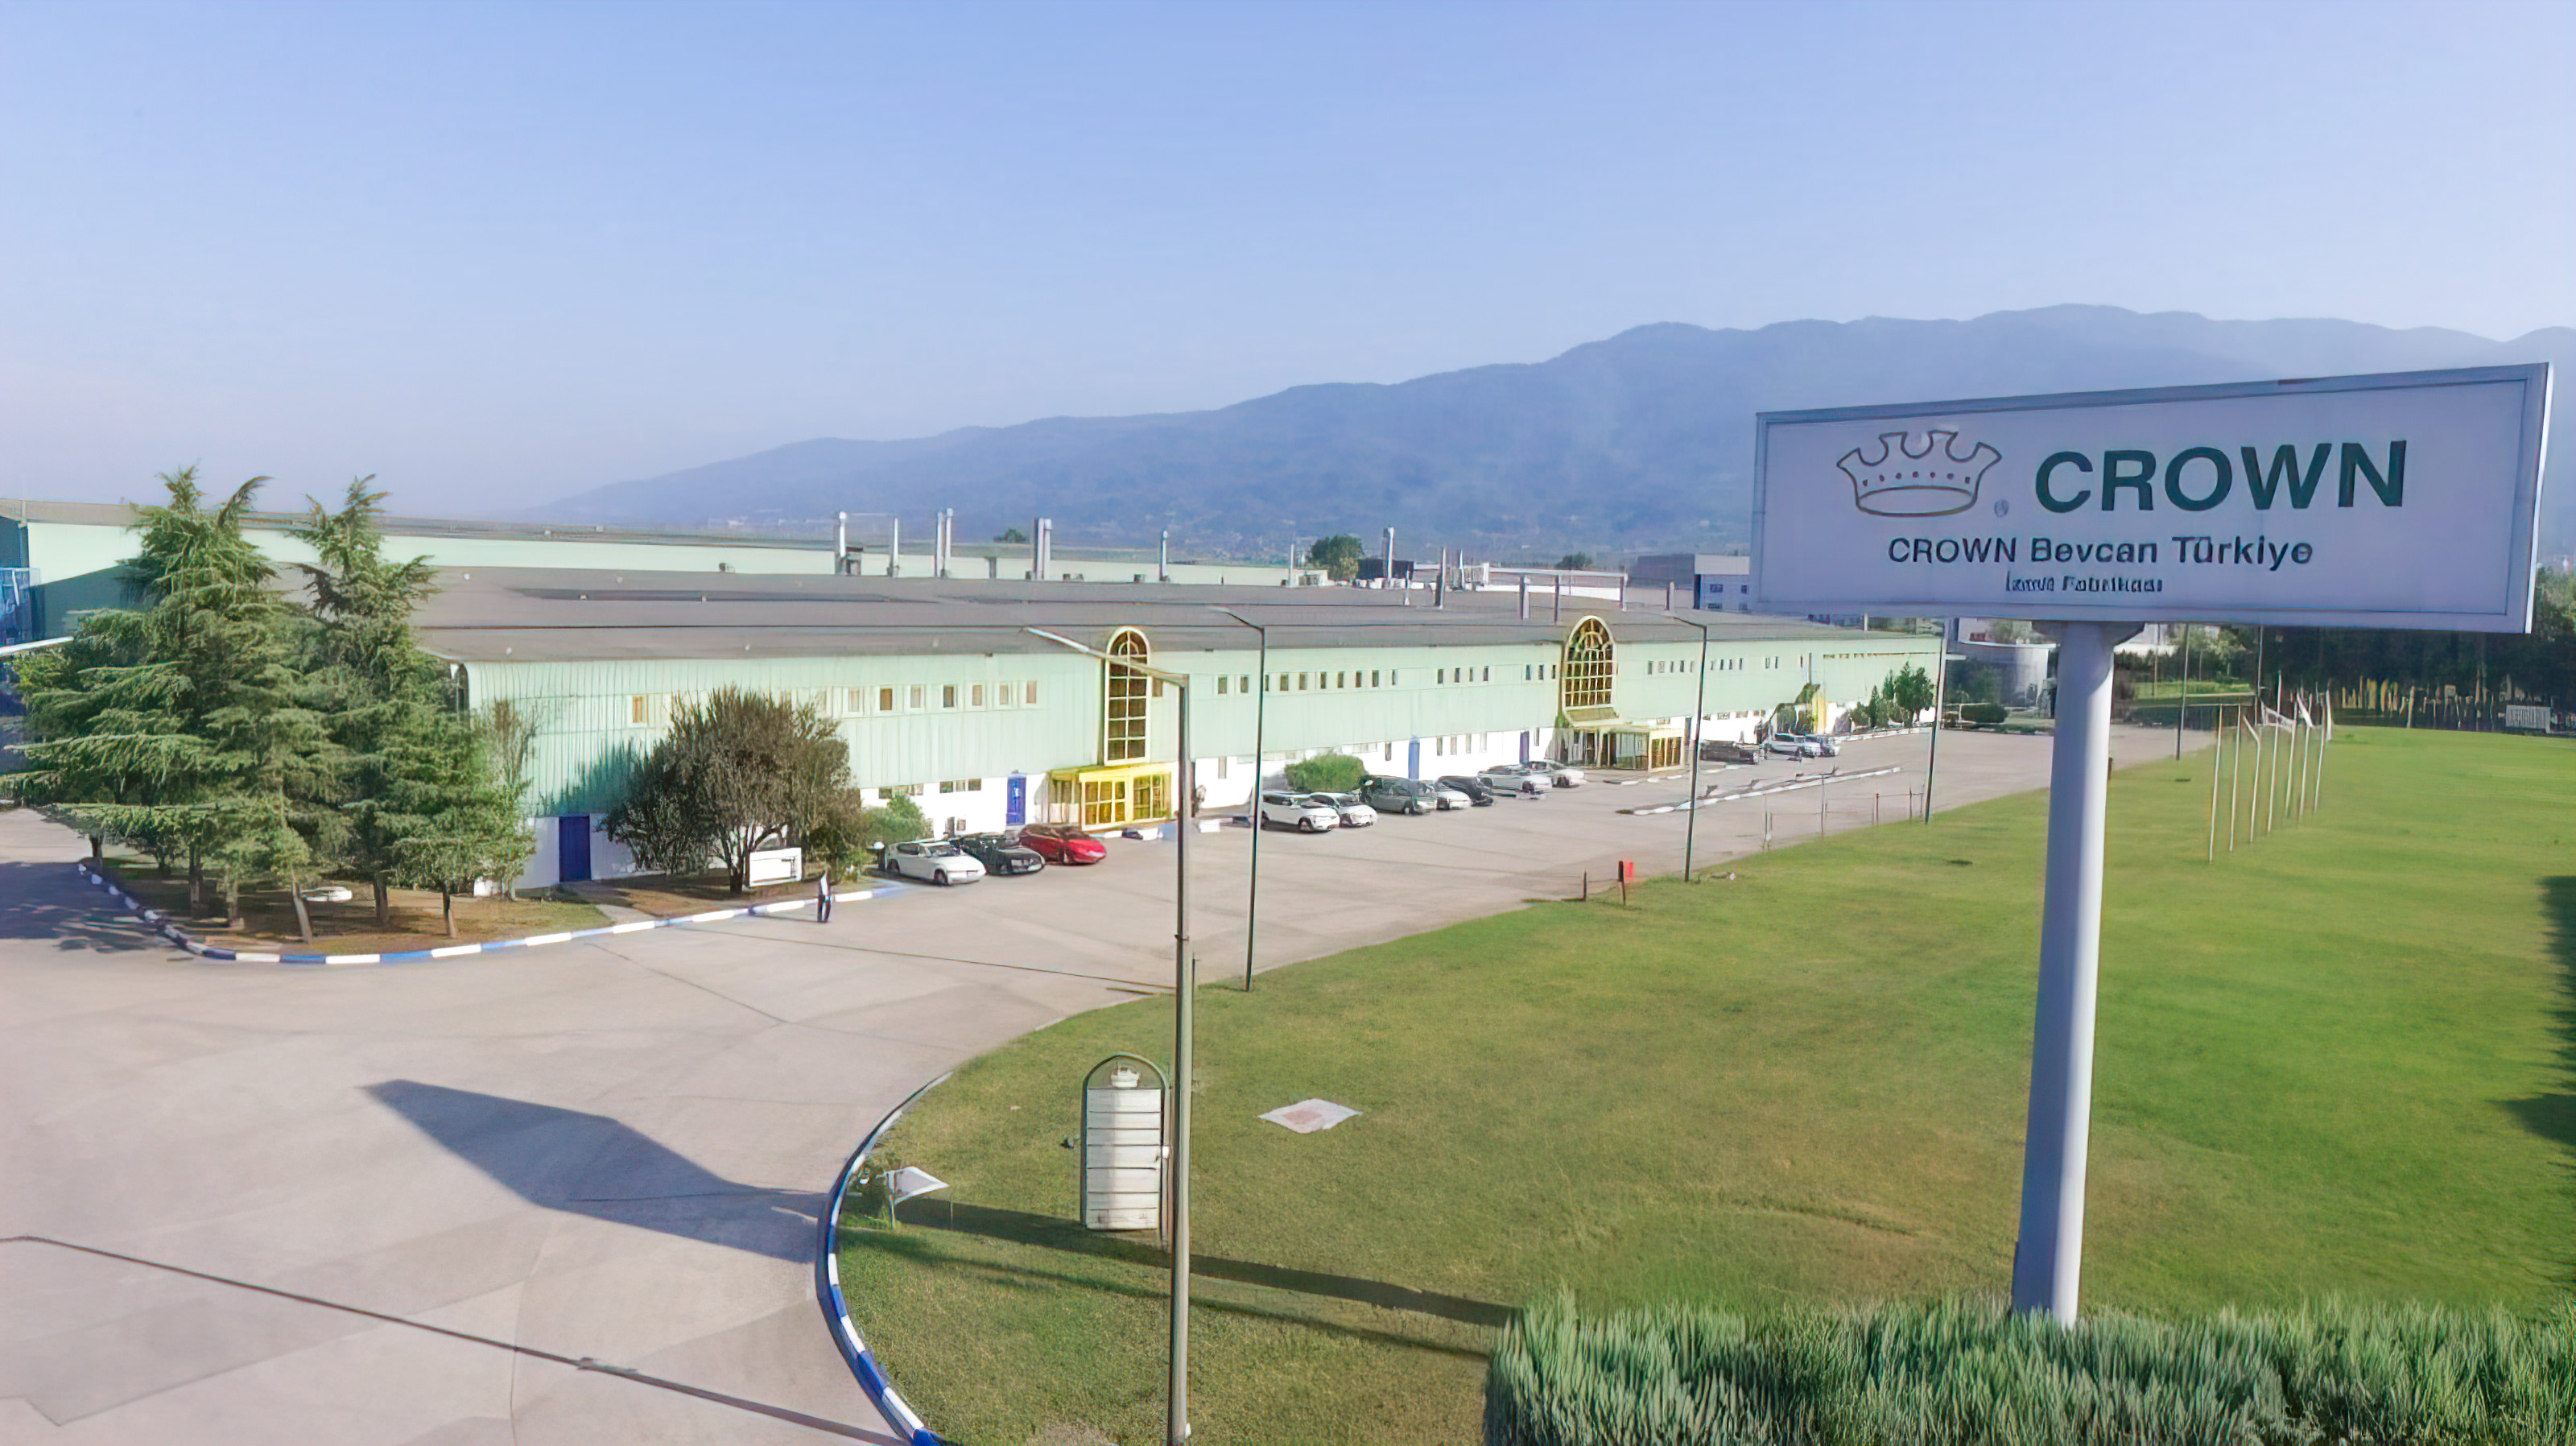 Manufacturing plant with sign that says Crown Bevcan Turkiye with mountains